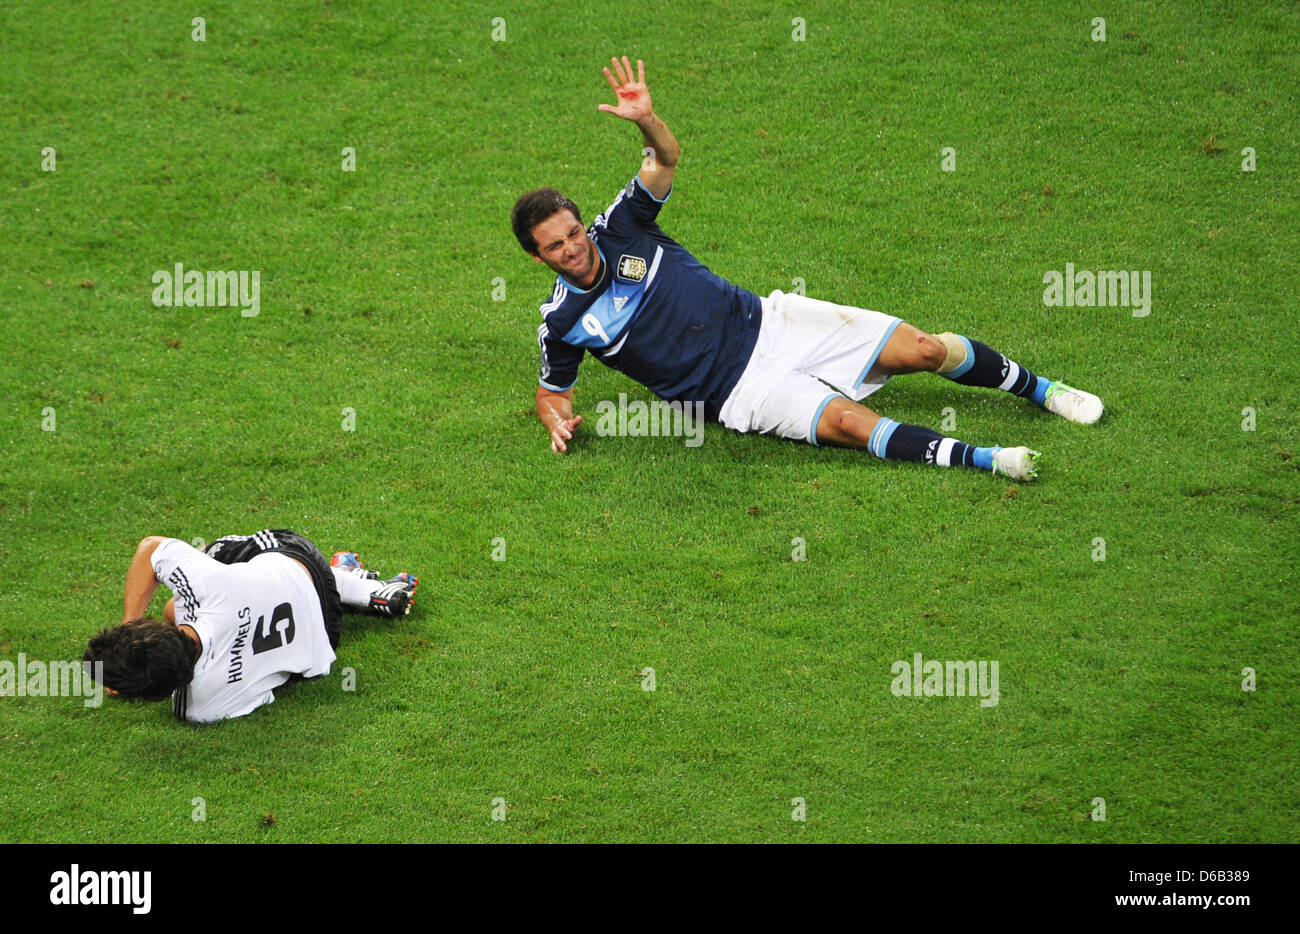 Germany's Mats Hummels (L) lies on the ground after a collision with Argentina's Gonzalo Higuain during the friendly soccer match between Germany and Argentina at the Commerzbank-Arena in Frankfurt/Main, Germany, 15 August 2012. Photo: Frank Kleefeldt Stock Photo